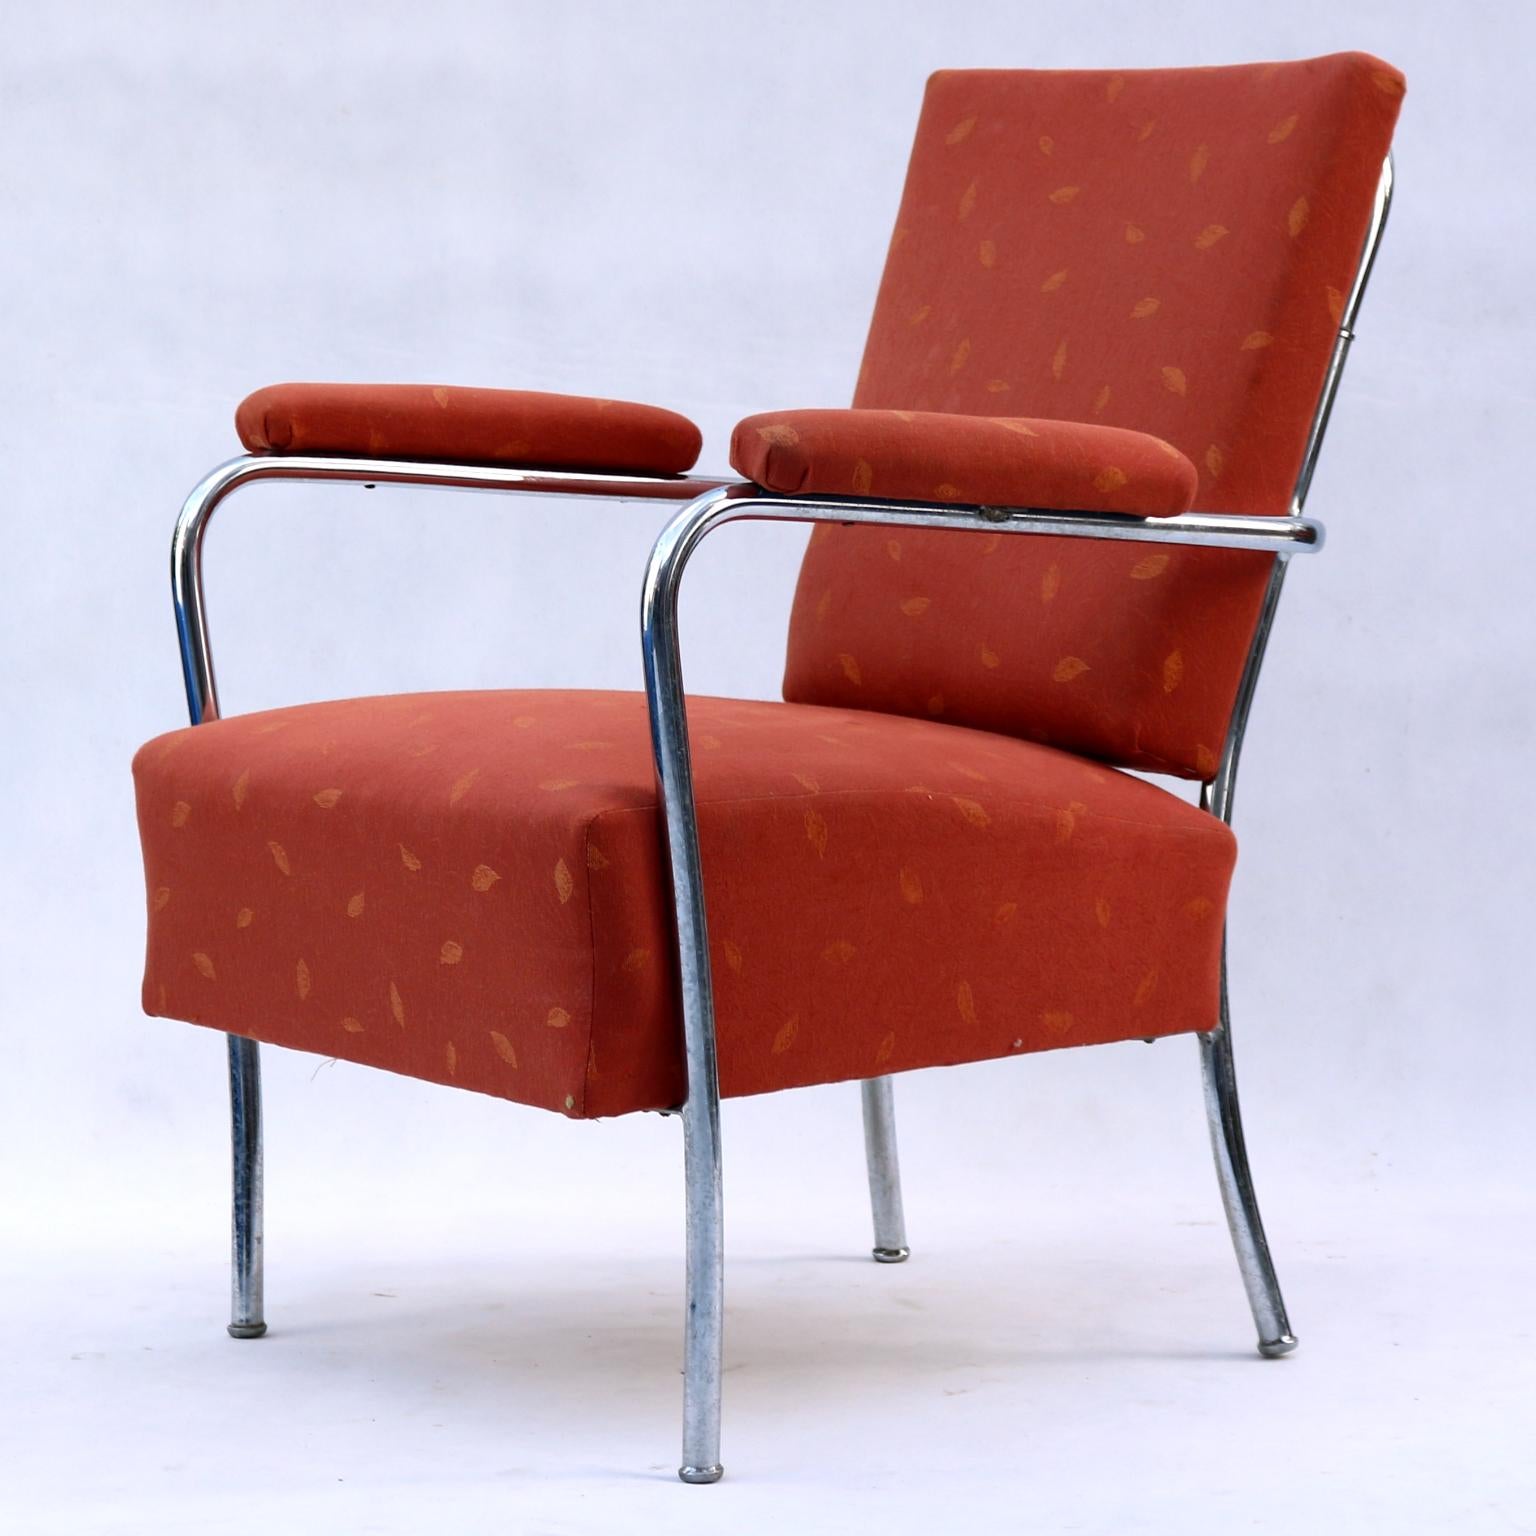 Czechoslovakian tubular chrome armchairs, 1930s. The upholstery was probably replaced in the past. Chrome is in good condition.